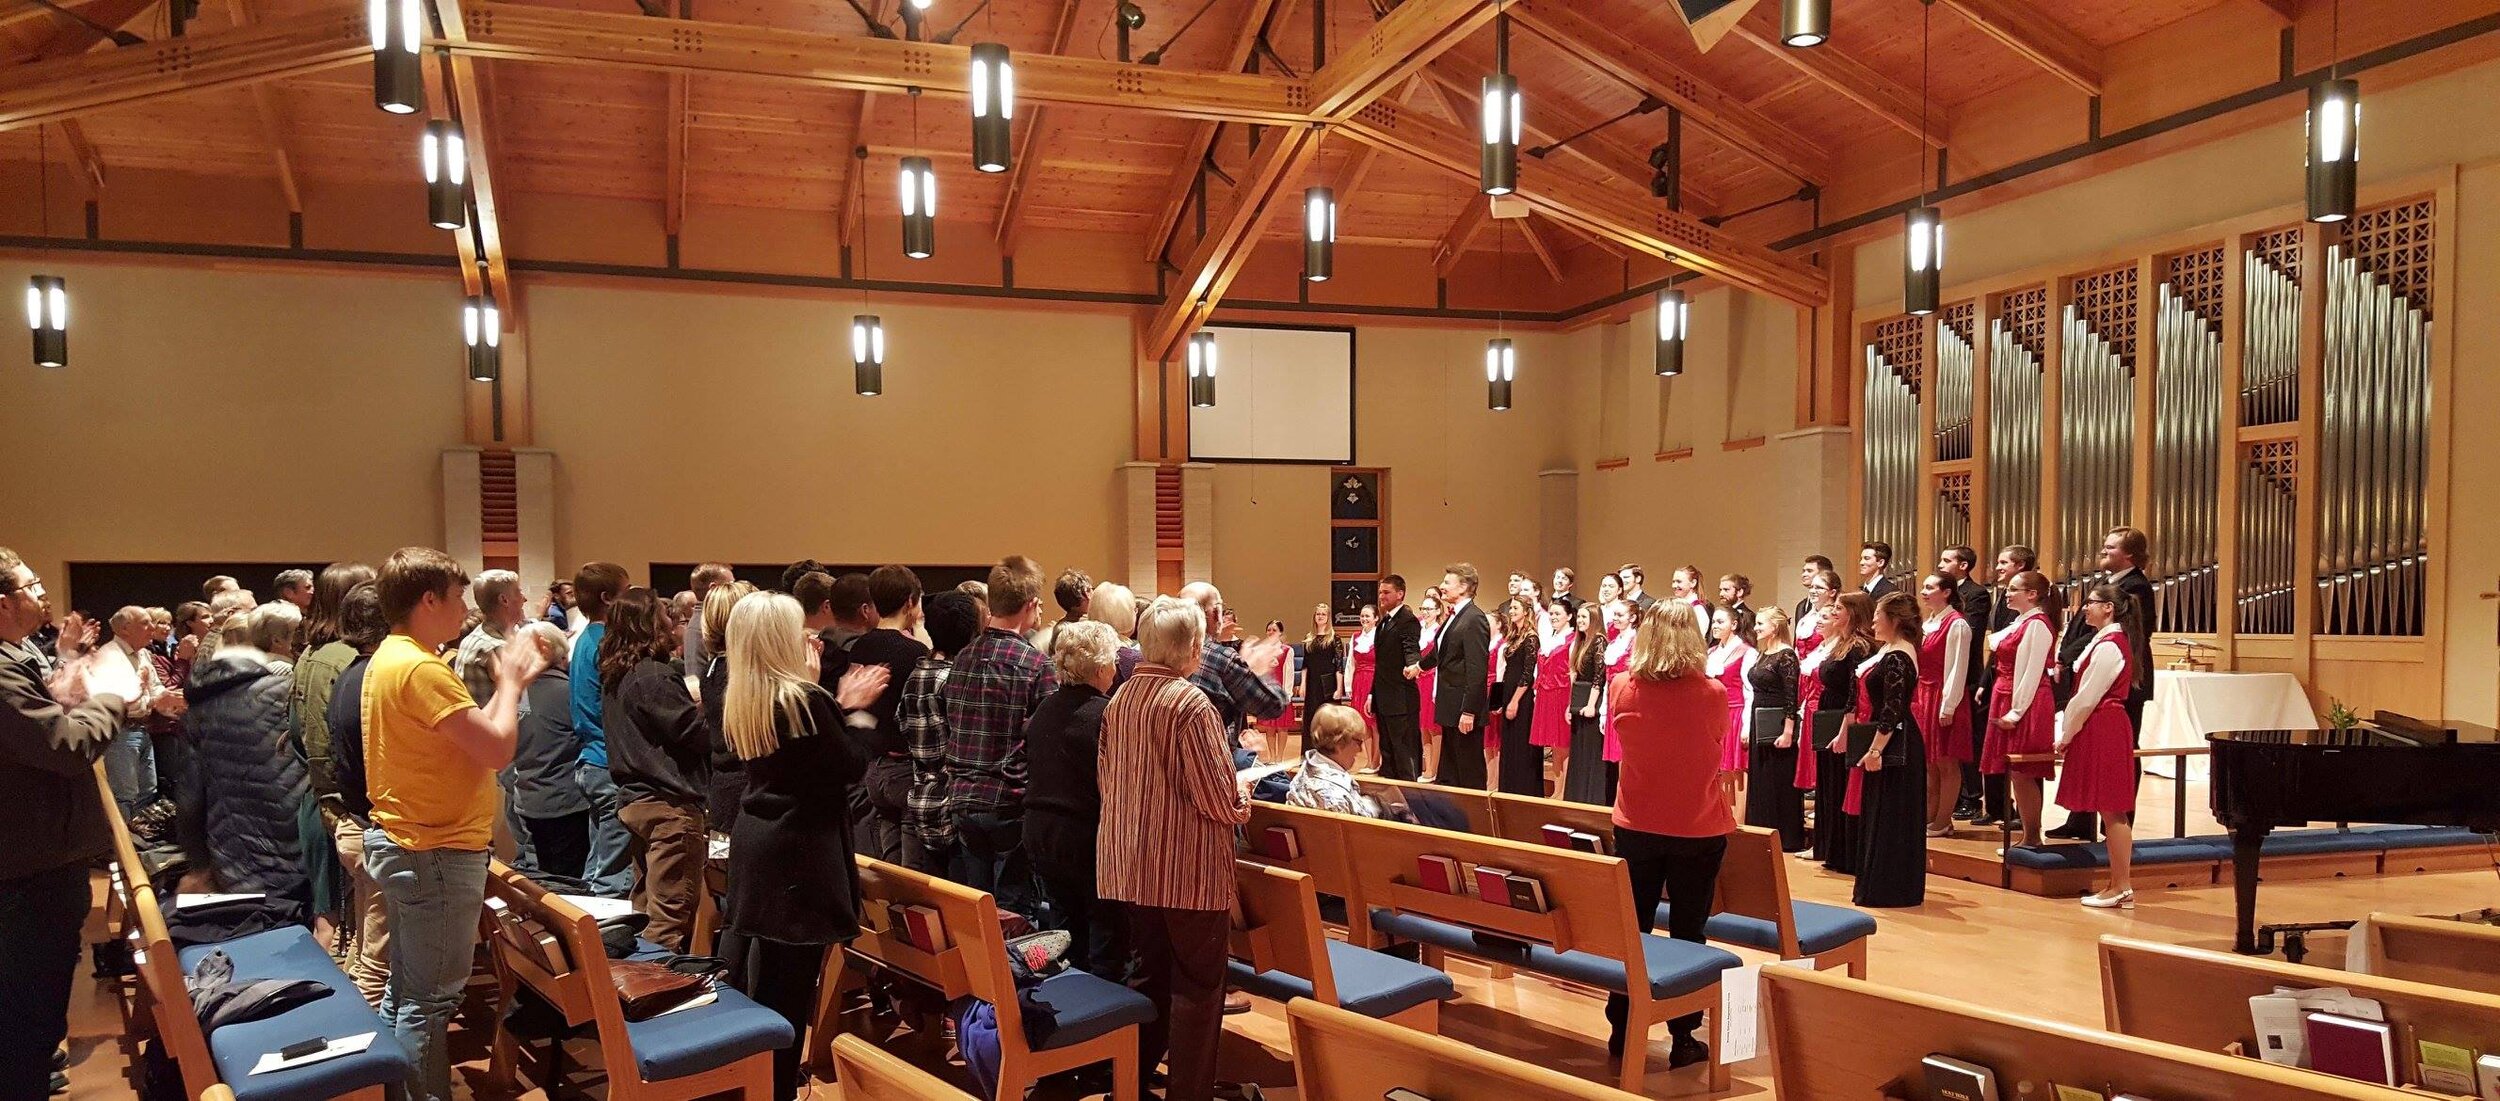  Taking bows after a performance with Jitro Czech Children’s Choir at Hope Lutheran Church, Spring 2016. 